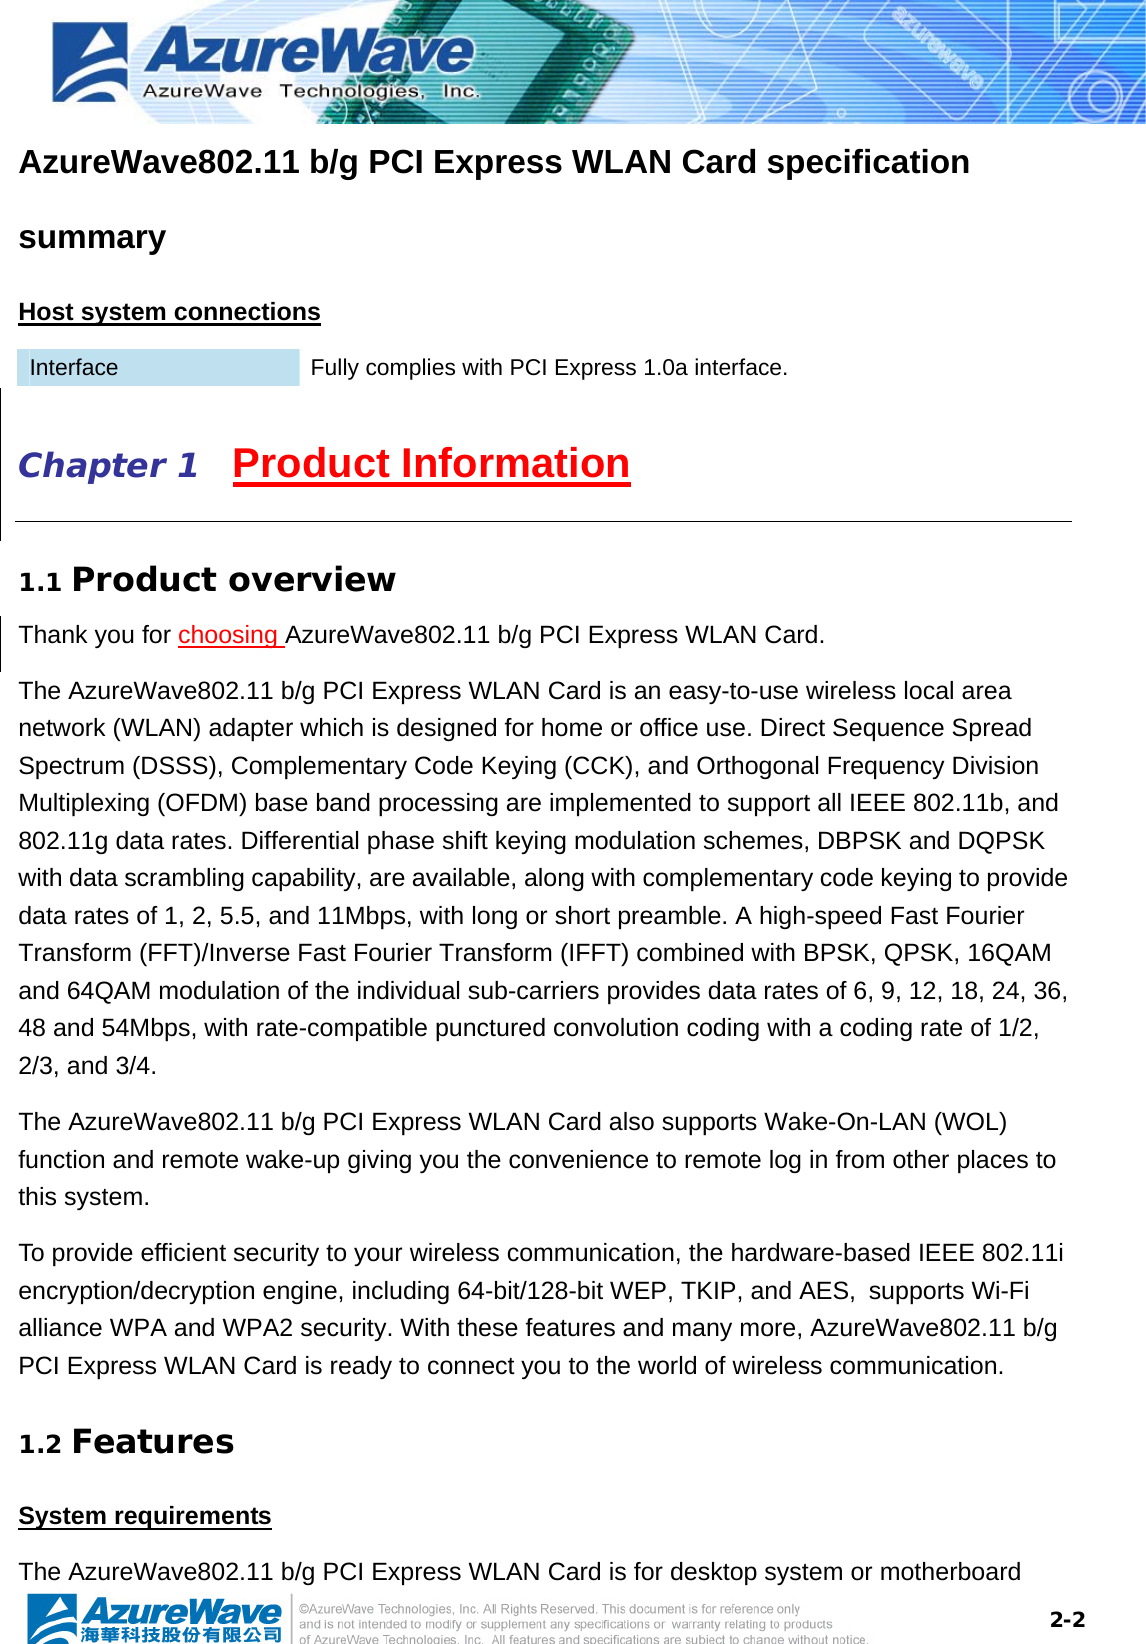  2-2AzureWave802.11 b/g PCI Express WLAN Card specification summary Host system connections Interface  Fully complies with PCI Express 1.0a interface. Chapter 1   Product Information 1.1 Product overview Thank you for choosing AzureWave802.11 b/g PCI Express WLAN Card.   The AzureWave802.11 b/g PCI Express WLAN Card is an easy-to-use wireless local area network (WLAN) adapter which is designed for home or office use. Direct Sequence Spread Spectrum (DSSS), Complementary Code Keying (CCK), and Orthogonal Frequency Division Multiplexing (OFDM) base band processing are implemented to support all IEEE 802.11b, and 802.11g data rates. Differential phase shift keying modulation schemes, DBPSK and DQPSK with data scrambling capability, are available, along with complementary code keying to provide data rates of 1, 2, 5.5, and 11Mbps, with long or short preamble. A high-speed Fast Fourier Transform (FFT)/Inverse Fast Fourier Transform (IFFT) combined with BPSK, QPSK, 16QAM and 64QAM modulation of the individual sub-carriers provides data rates of 6, 9, 12, 18, 24, 36, 48 and 54Mbps, with rate-compatible punctured convolution coding with a coding rate of 1/2, 2/3, and 3/4.   The AzureWave802.11 b/g PCI Express WLAN Card also supports Wake-On-LAN (WOL) function and remote wake-up giving you the convenience to remote log in from other places to this system.   To provide efficient security to your wireless communication, the hardware-based IEEE 802.11i encryption/decryption engine, including 64-bit/128-bit WEP, TKIP, and AES, supports Wi-Fi alliance WPA and WPA2 security. With these features and many more, AzureWave802.11 b/g PCI Express WLAN Card is ready to connect you to the world of wireless communication. 1.2 Features System requirements The AzureWave802.11 b/g PCI Express WLAN Card is for desktop system or motherboard 